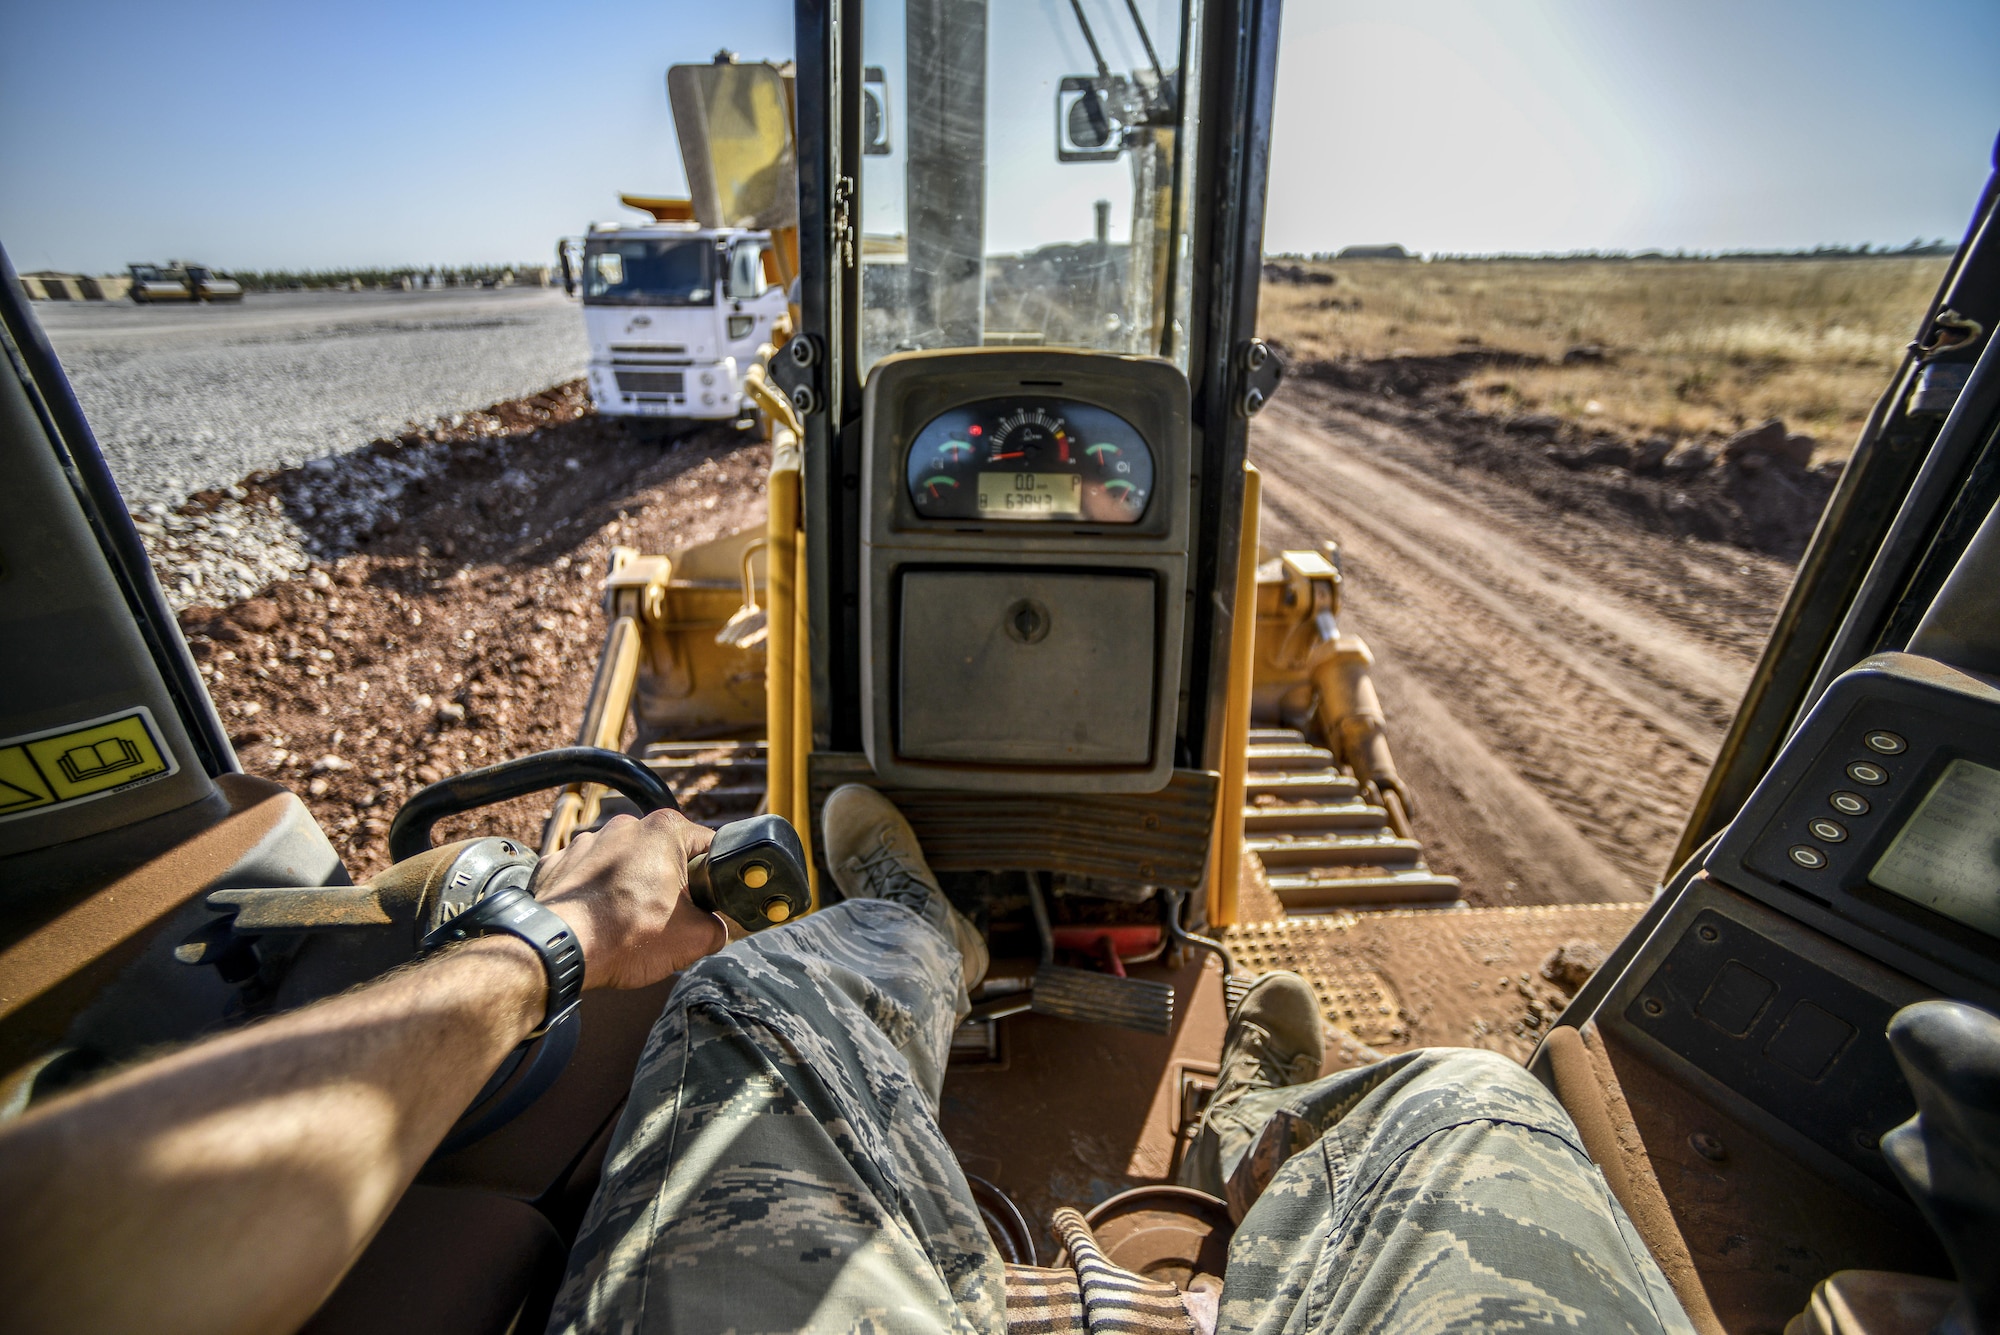 Staff Sgt. Logan Pals, a 435th Construction Training Squadron pavements and construction equipment operator, sits in the seat of a bulldozer while waiting for gravel to be dumped Sept. 24, 2015, at Diyarbakir Air Base, Turkey. The 435th CTS has more than 10 construction vehicles that are used to dump, move, grade and roll gravel throughout the base. (U.S. Air Force photo/Airman 1st Class Cory W. Bush)